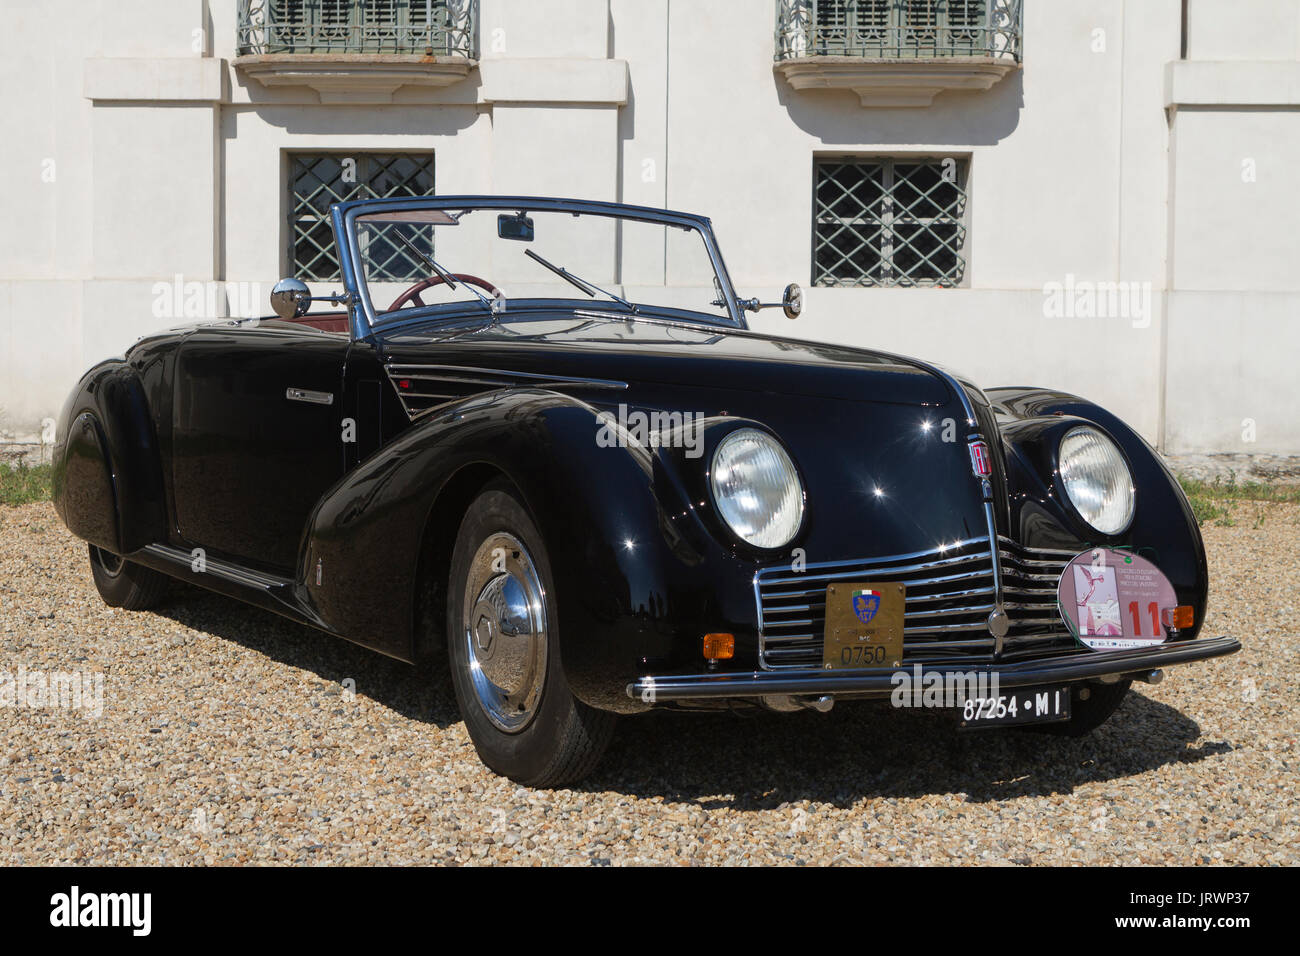 A 1940 Fiat 1500 Cabriolet. Vintage cars and sportscar on exhibition in Torino during Parco Valentino car show. Stock Photo